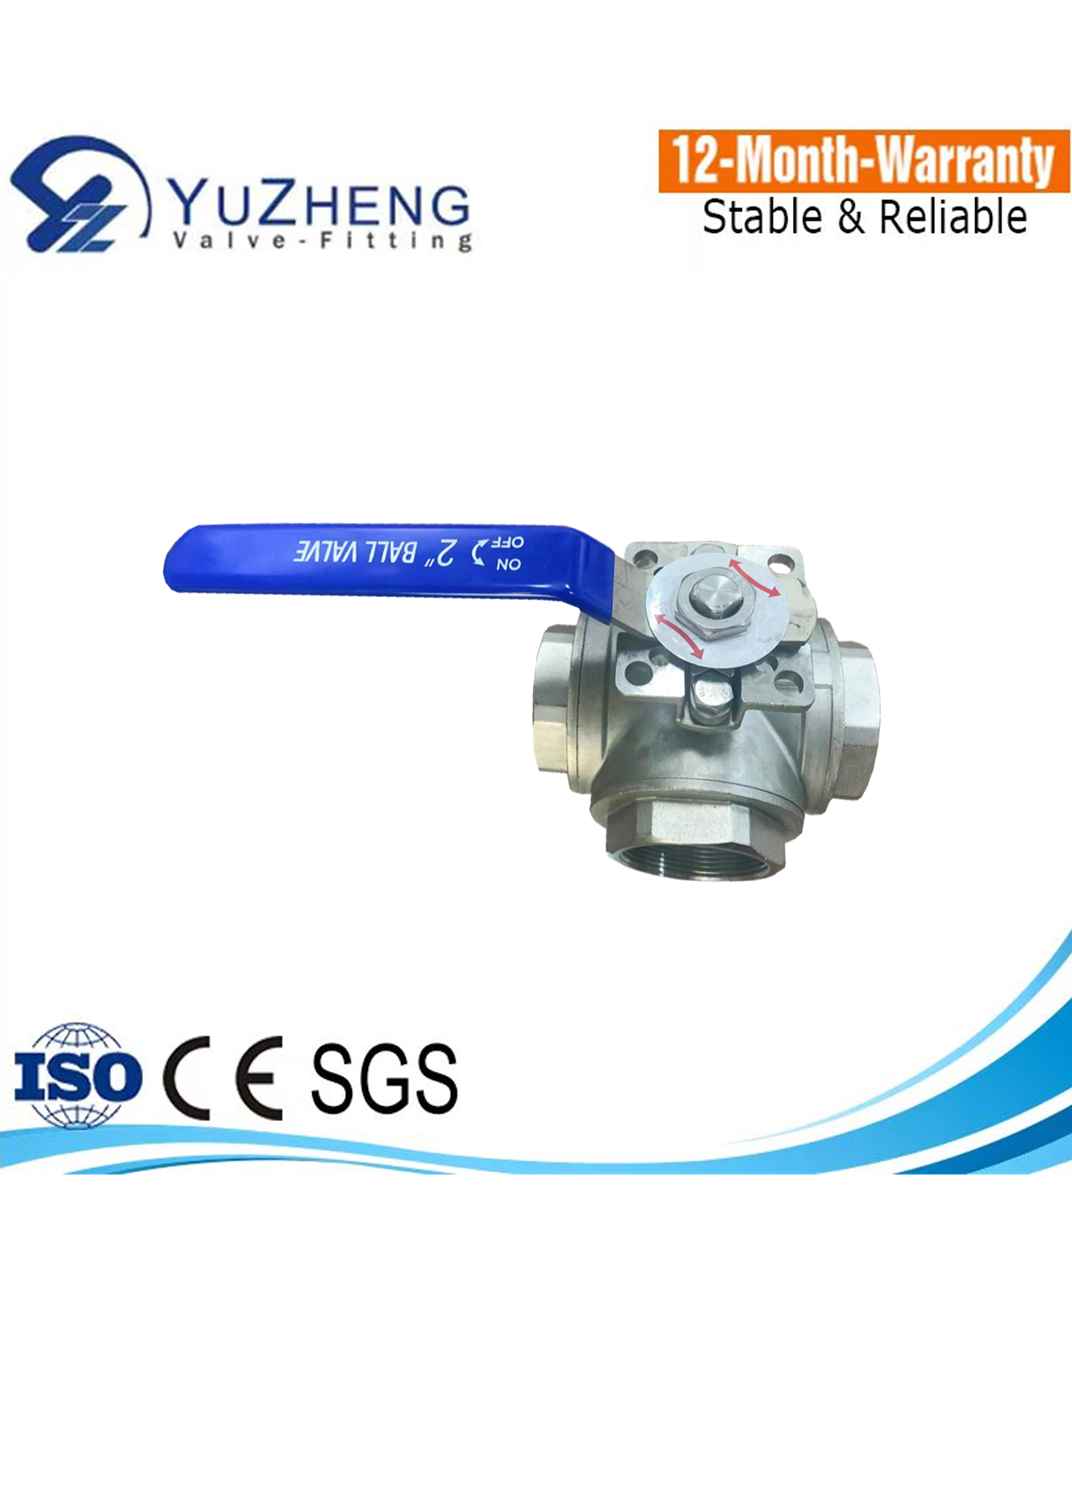 4-WAY BALL VALVE WITH HIGH MOUNTING PAD